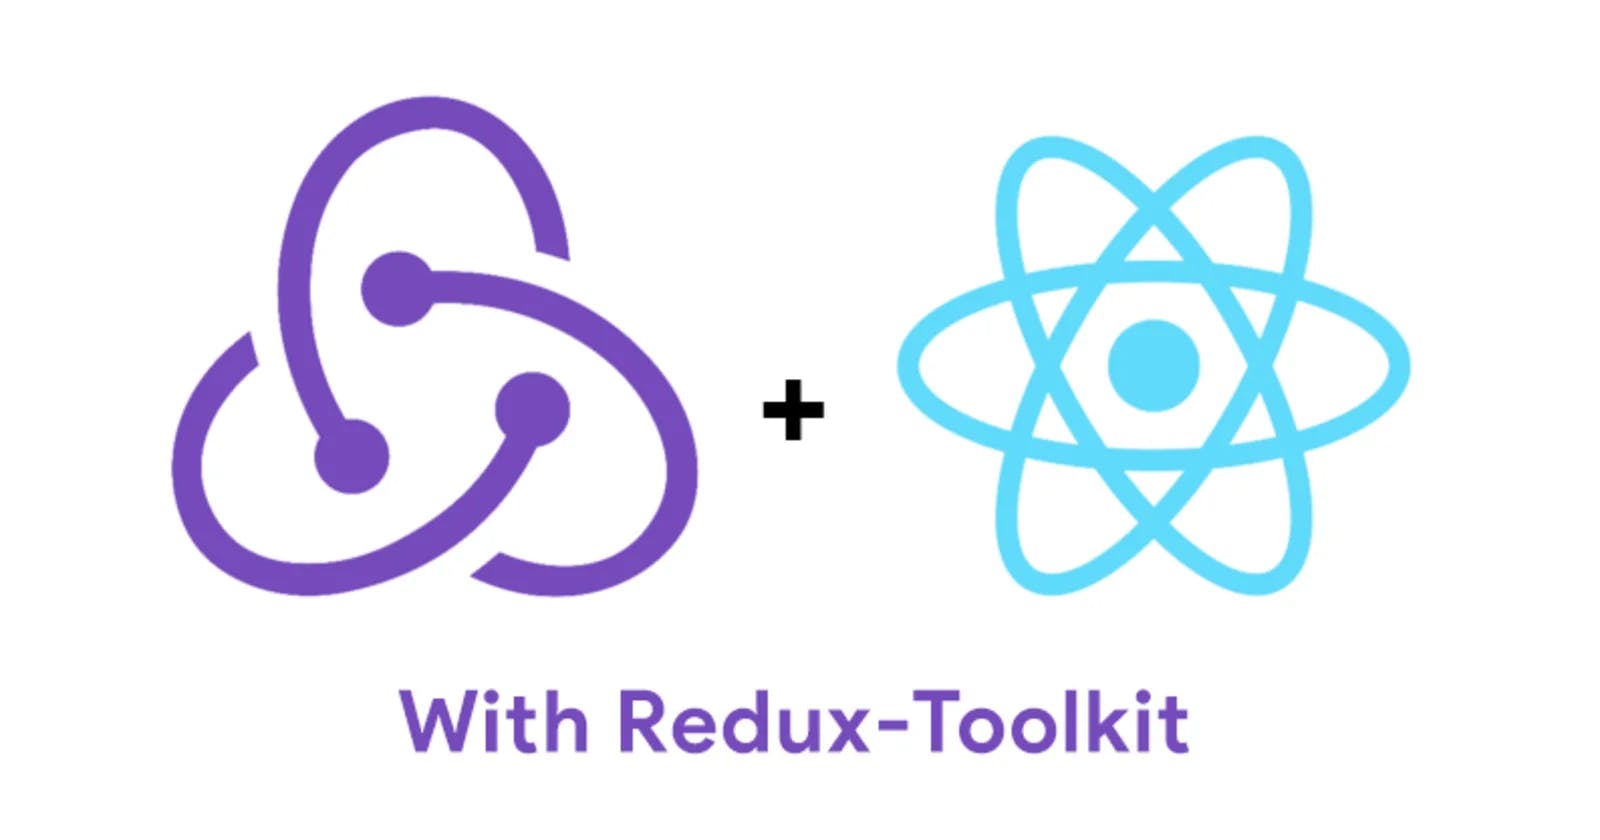 Introduction to Redux toolkit